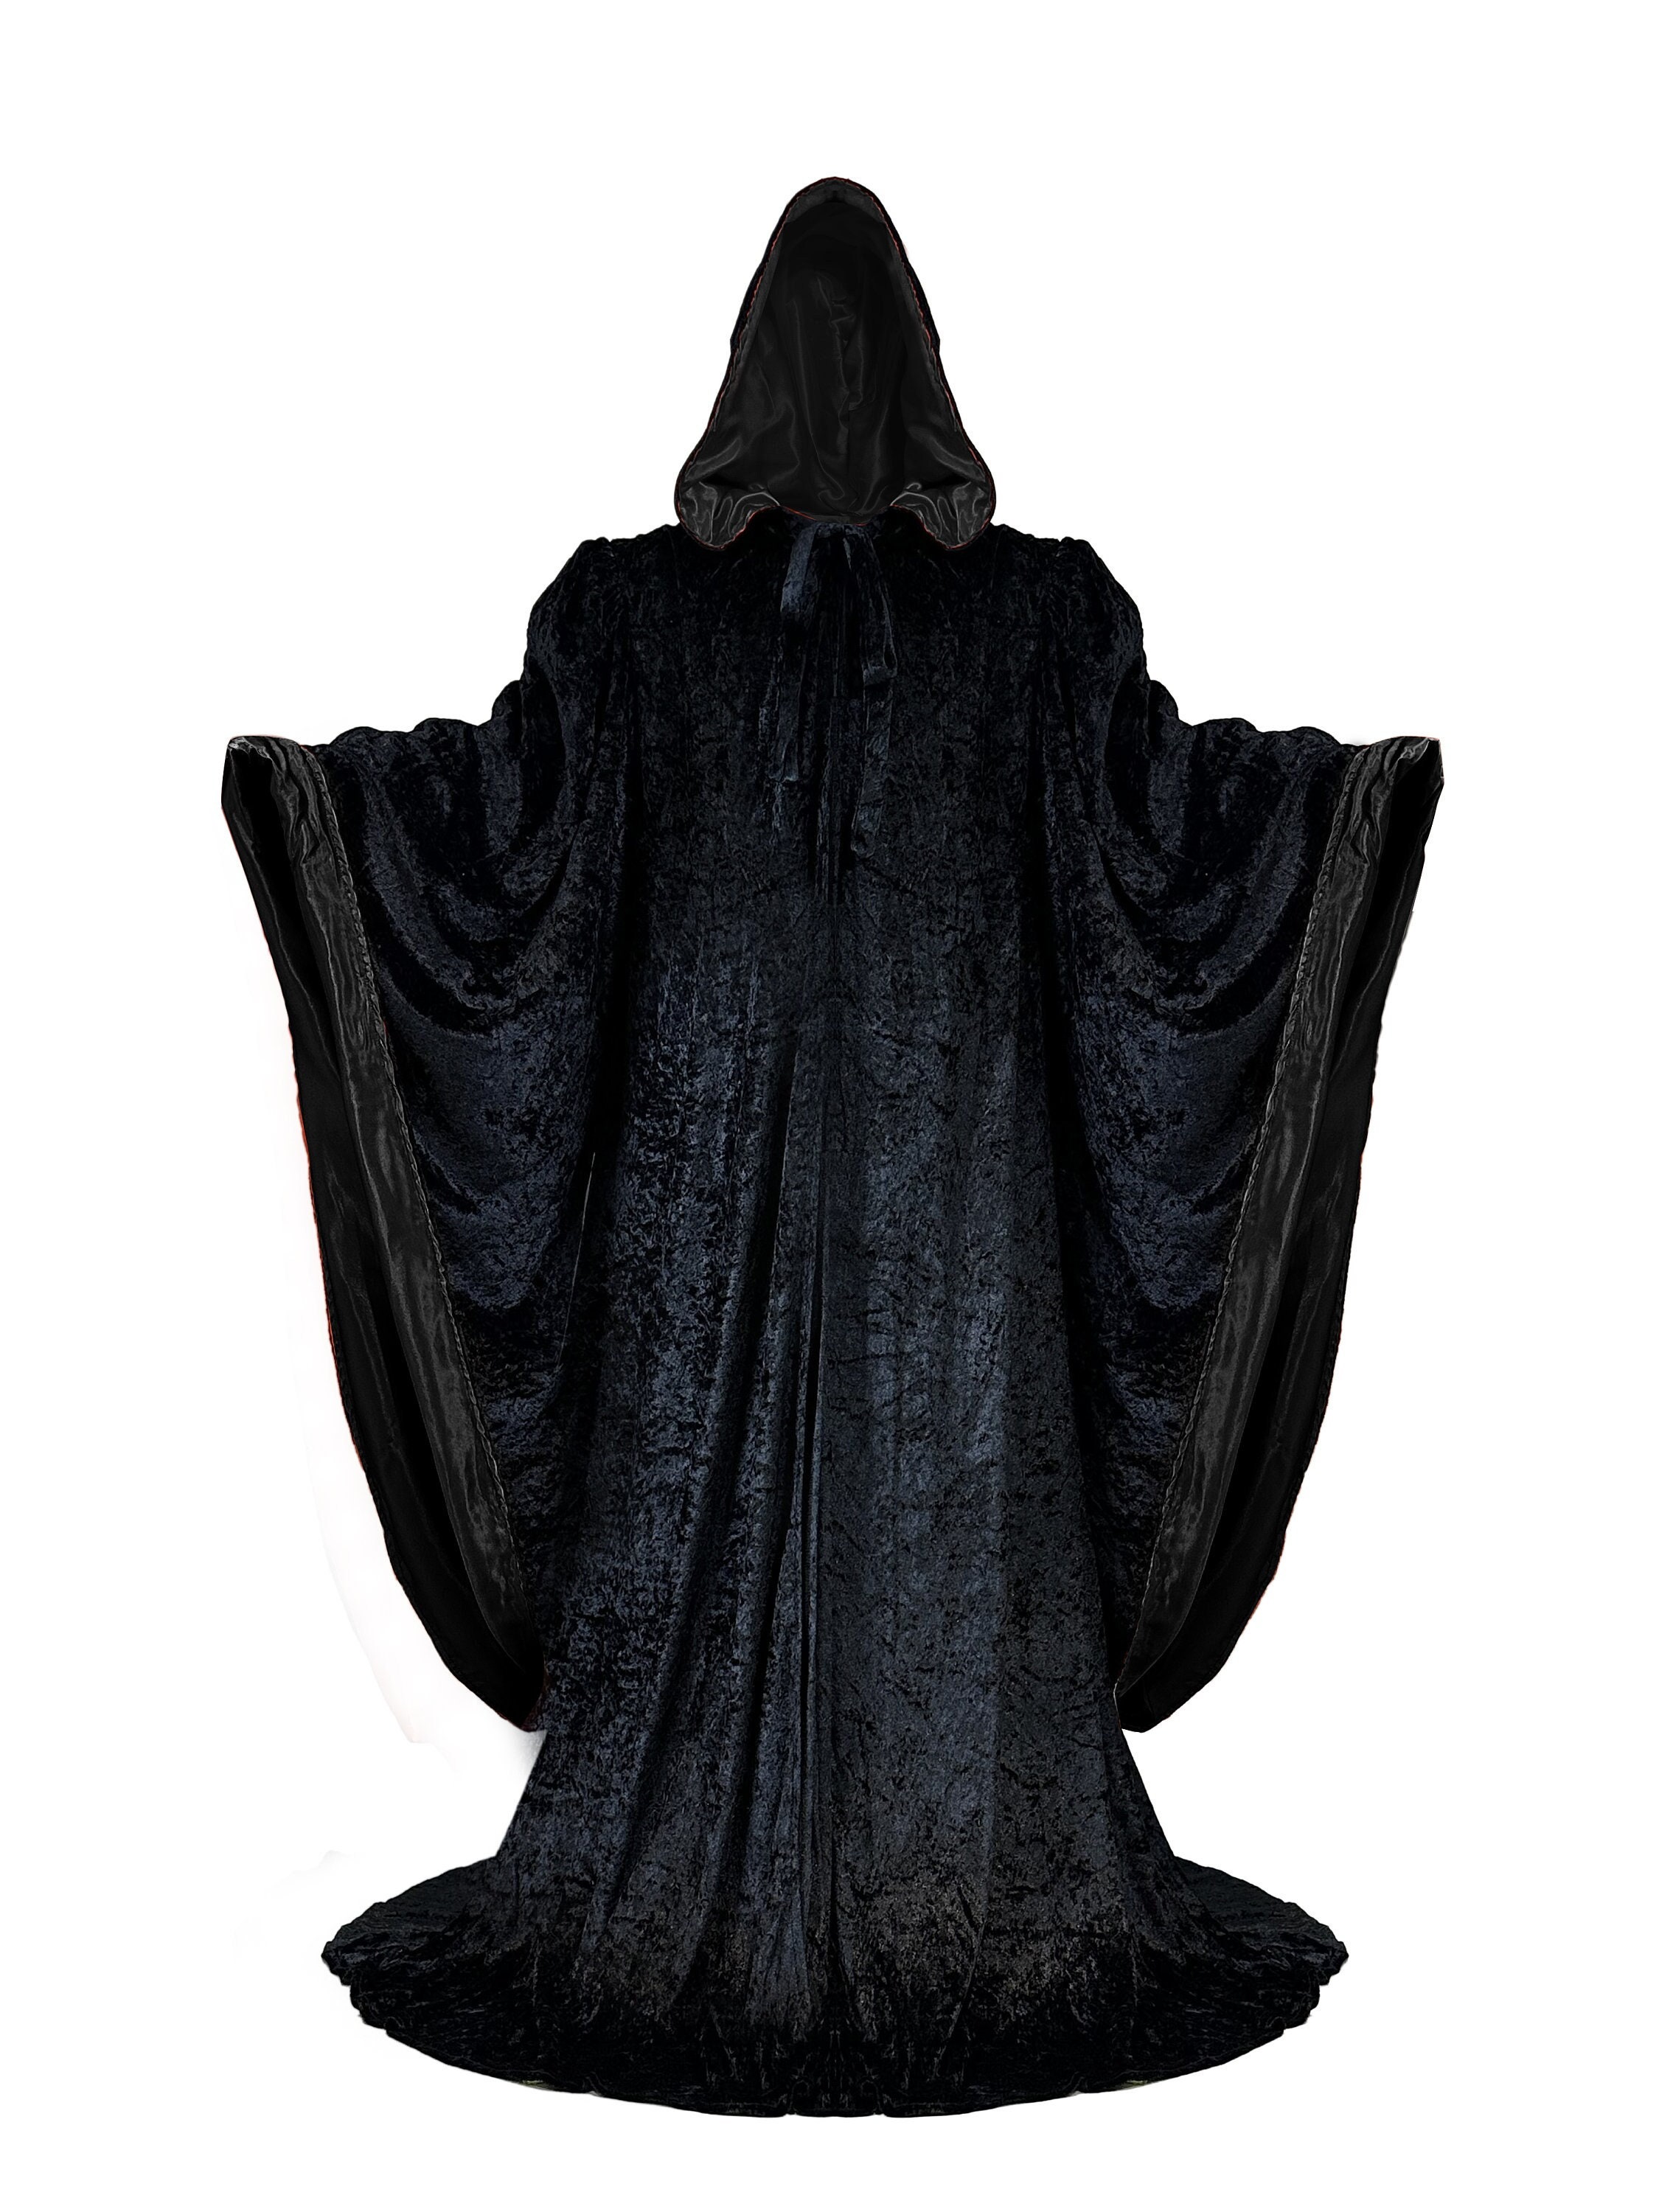 1pc Men's Short Black Hooded Cape, Perfect For Halloween Parties